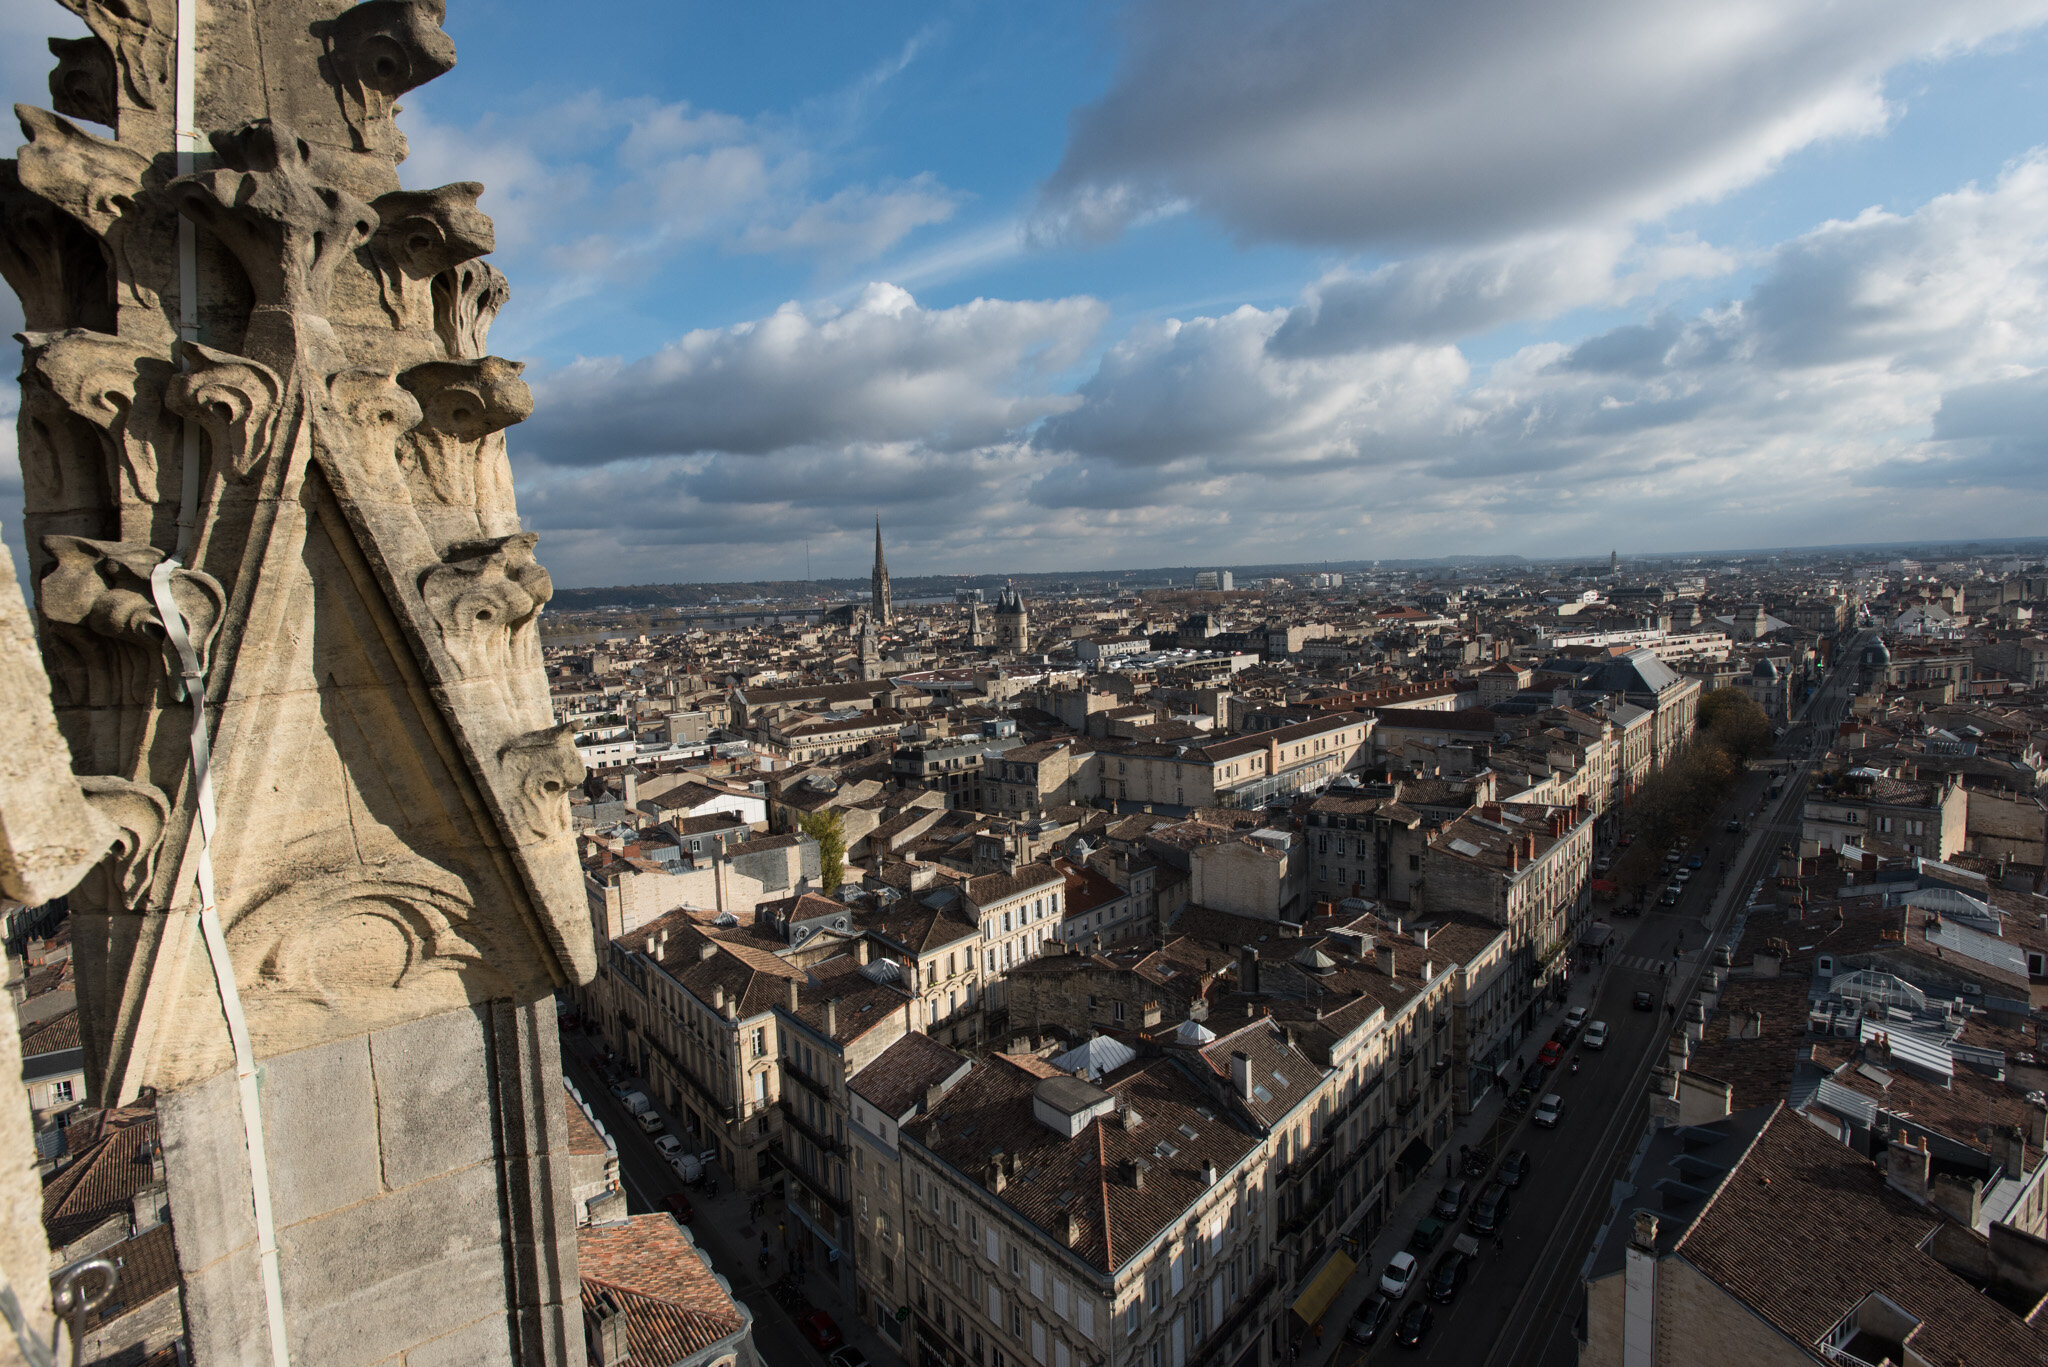    'Bordeaux' National Geographic U.K.    View from the top of the Saint-Andre cathedral 